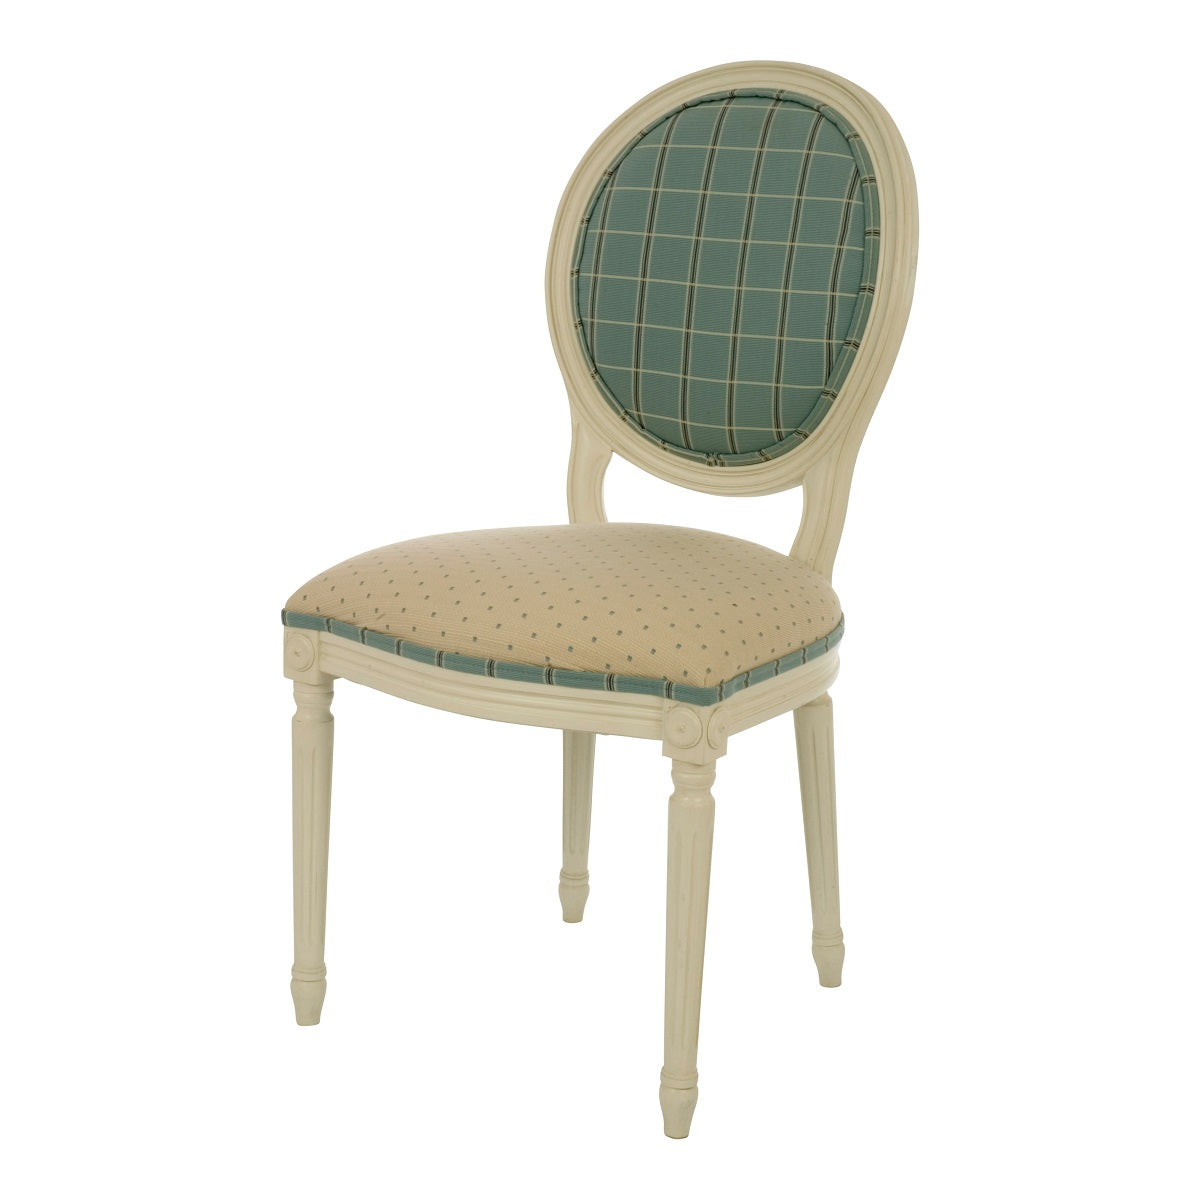 Oval Wooden Upholstered Chair - detail